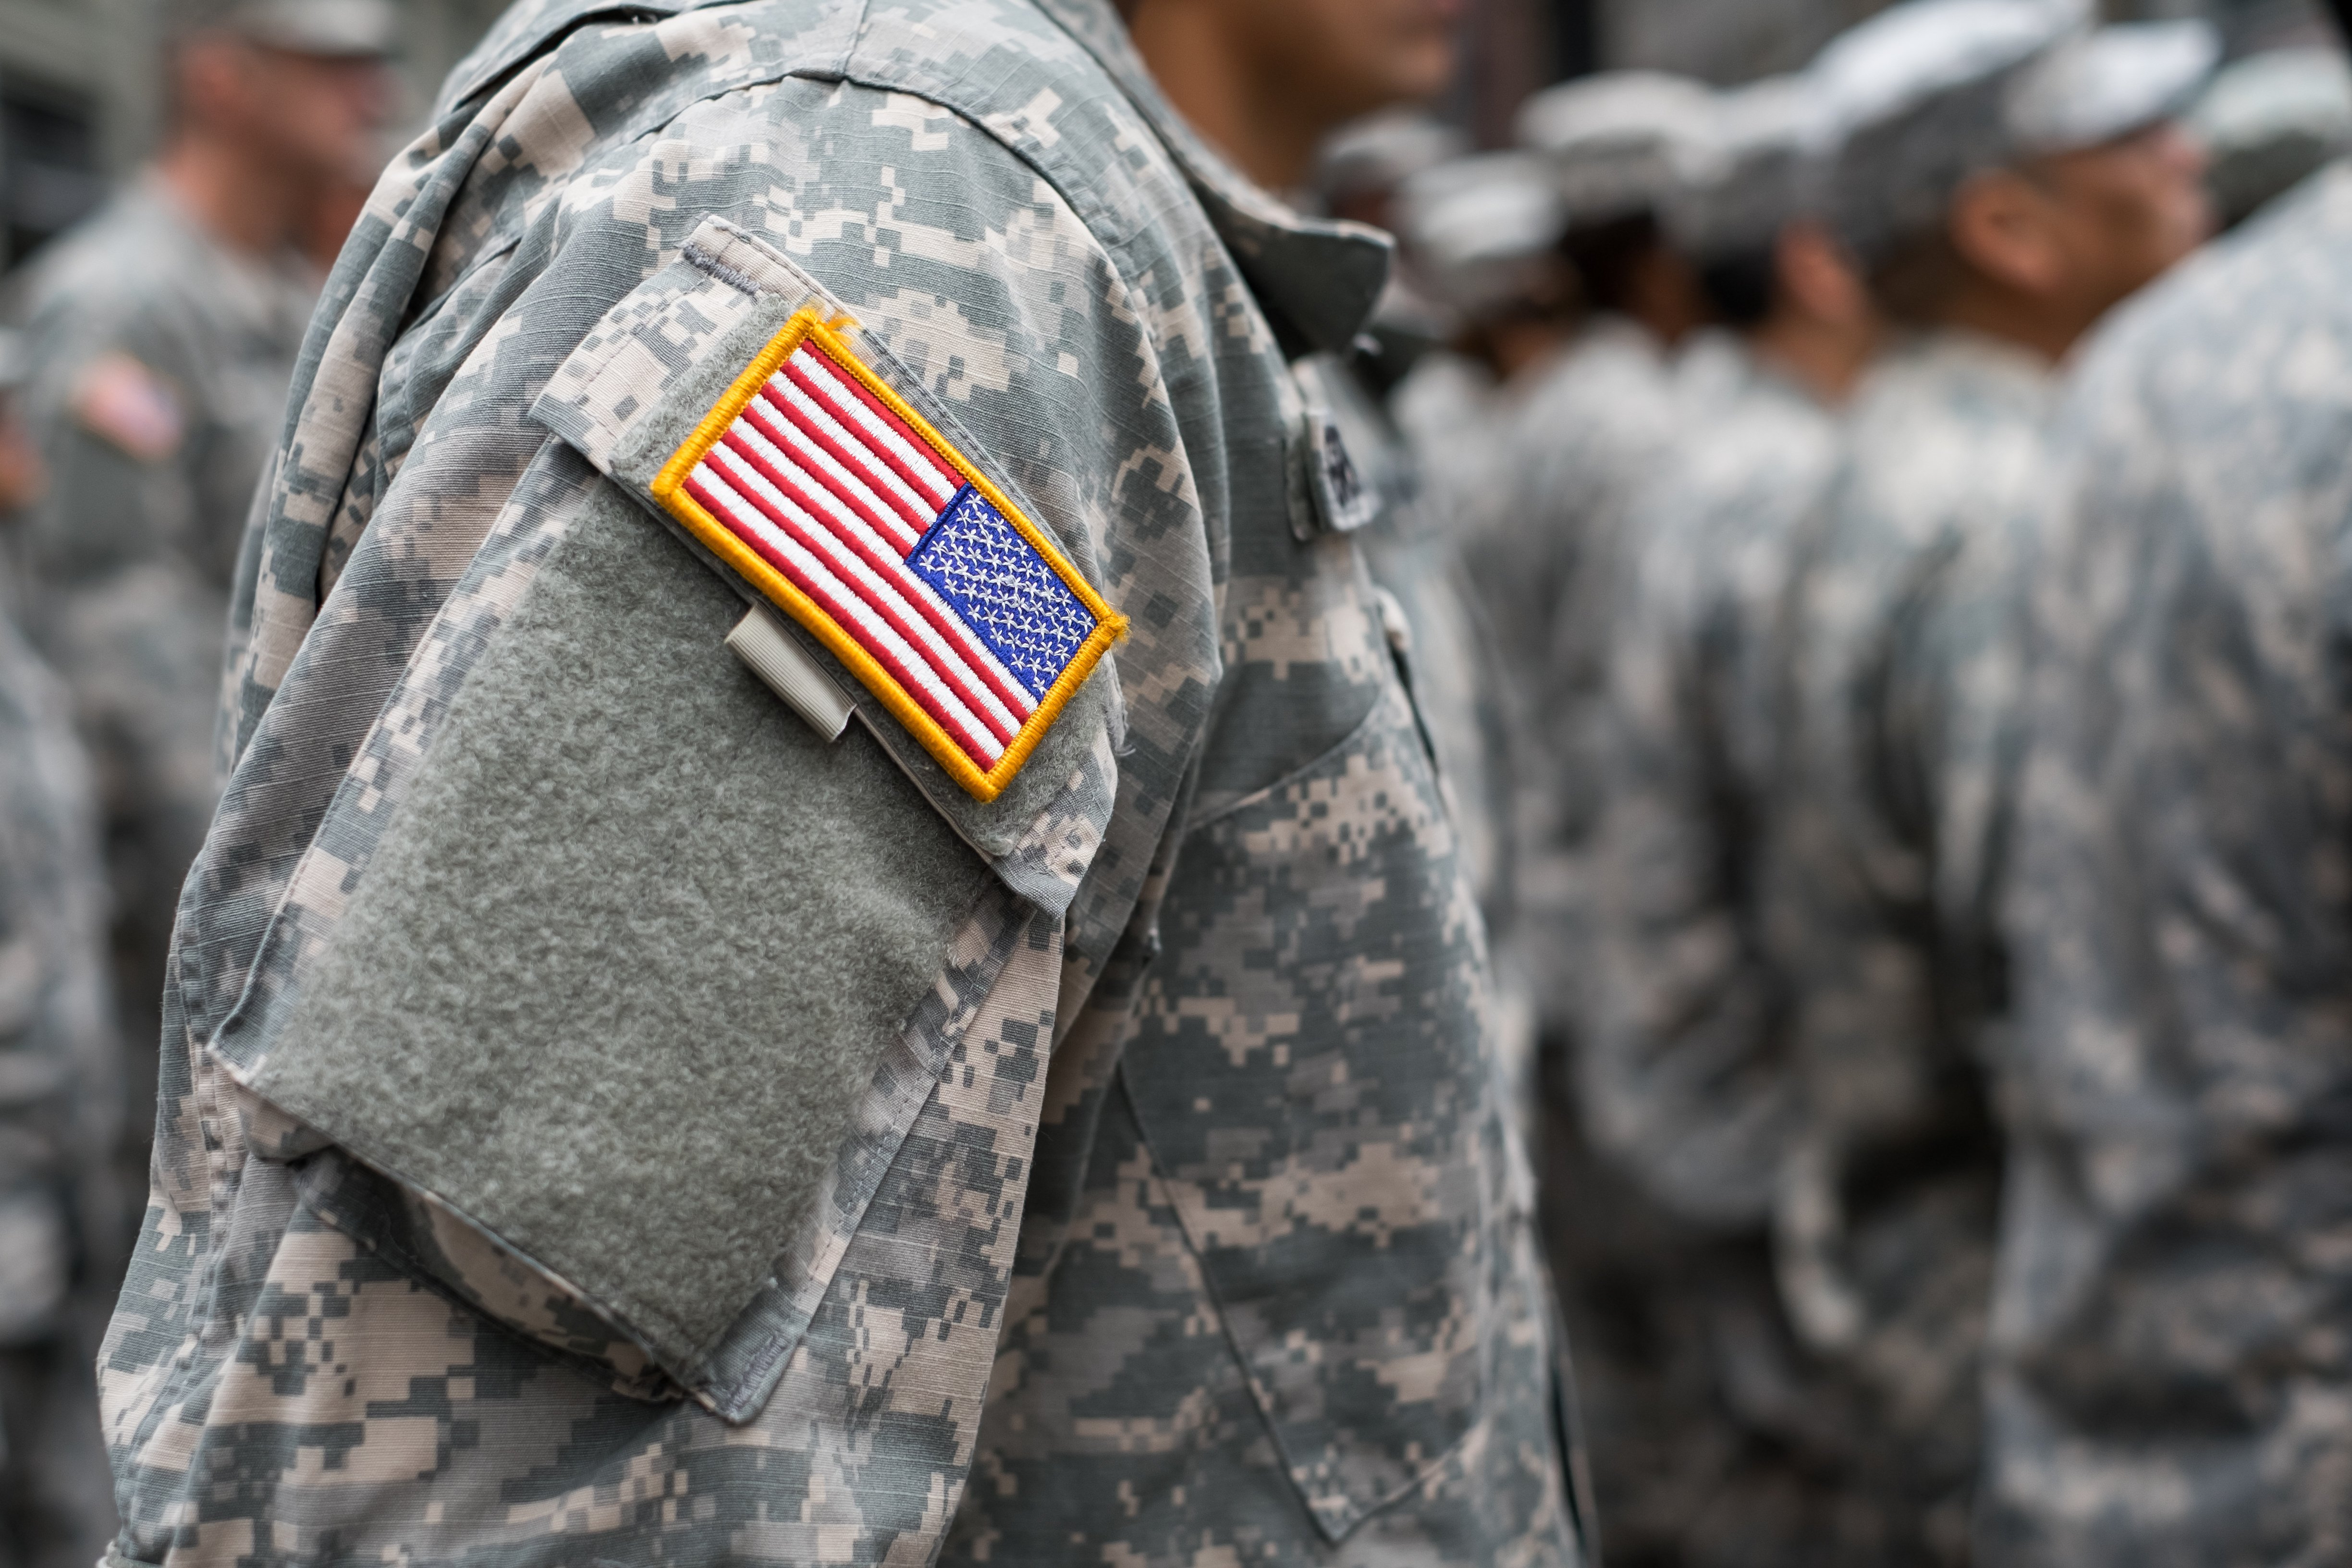 USA patch flag on soldiers arm | Photo: Shutterstock